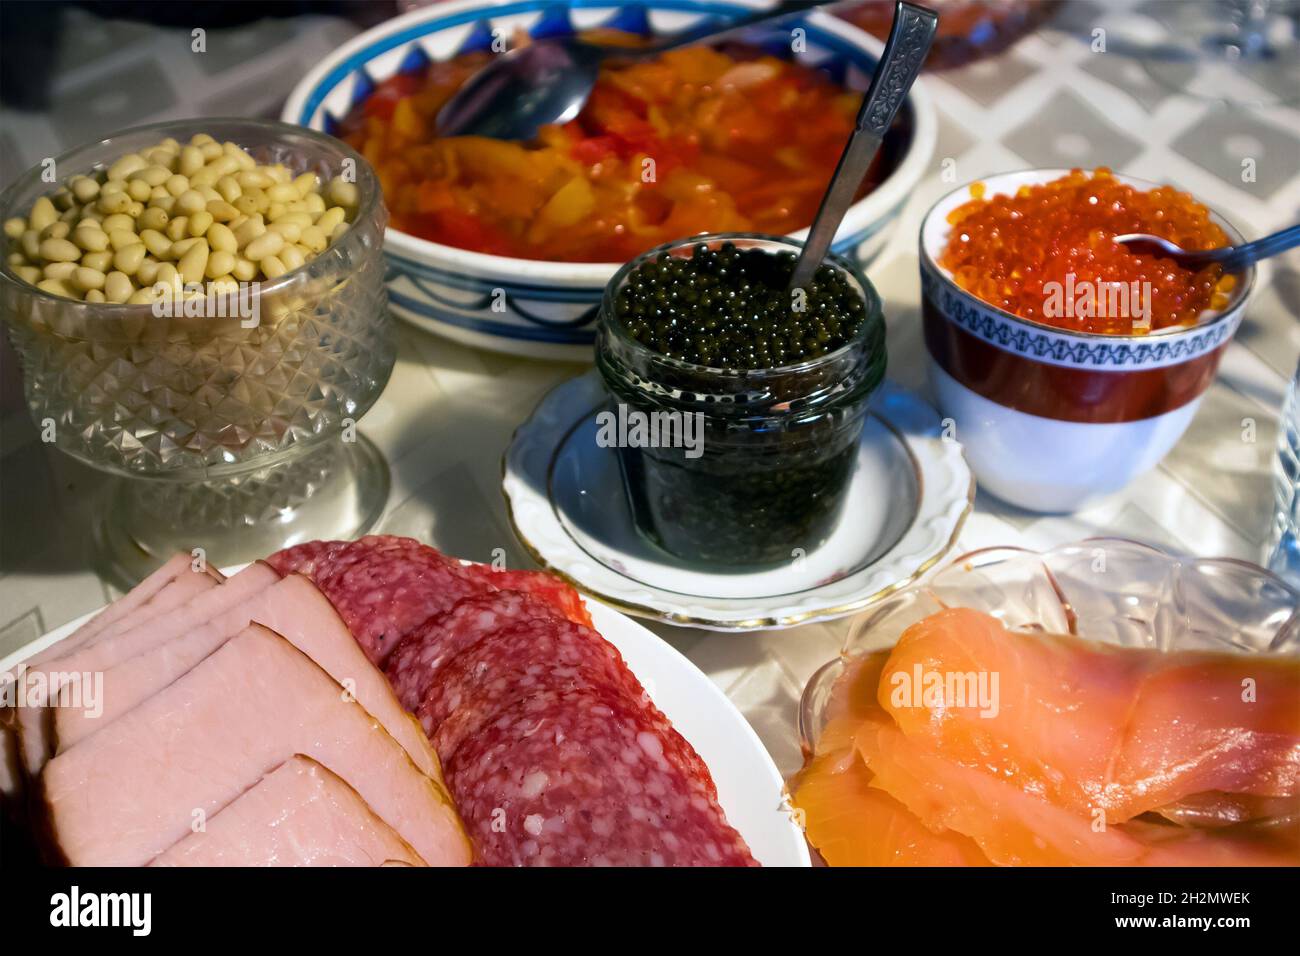 Home festive served table with red and black caviar and other different snacks Stock Photo